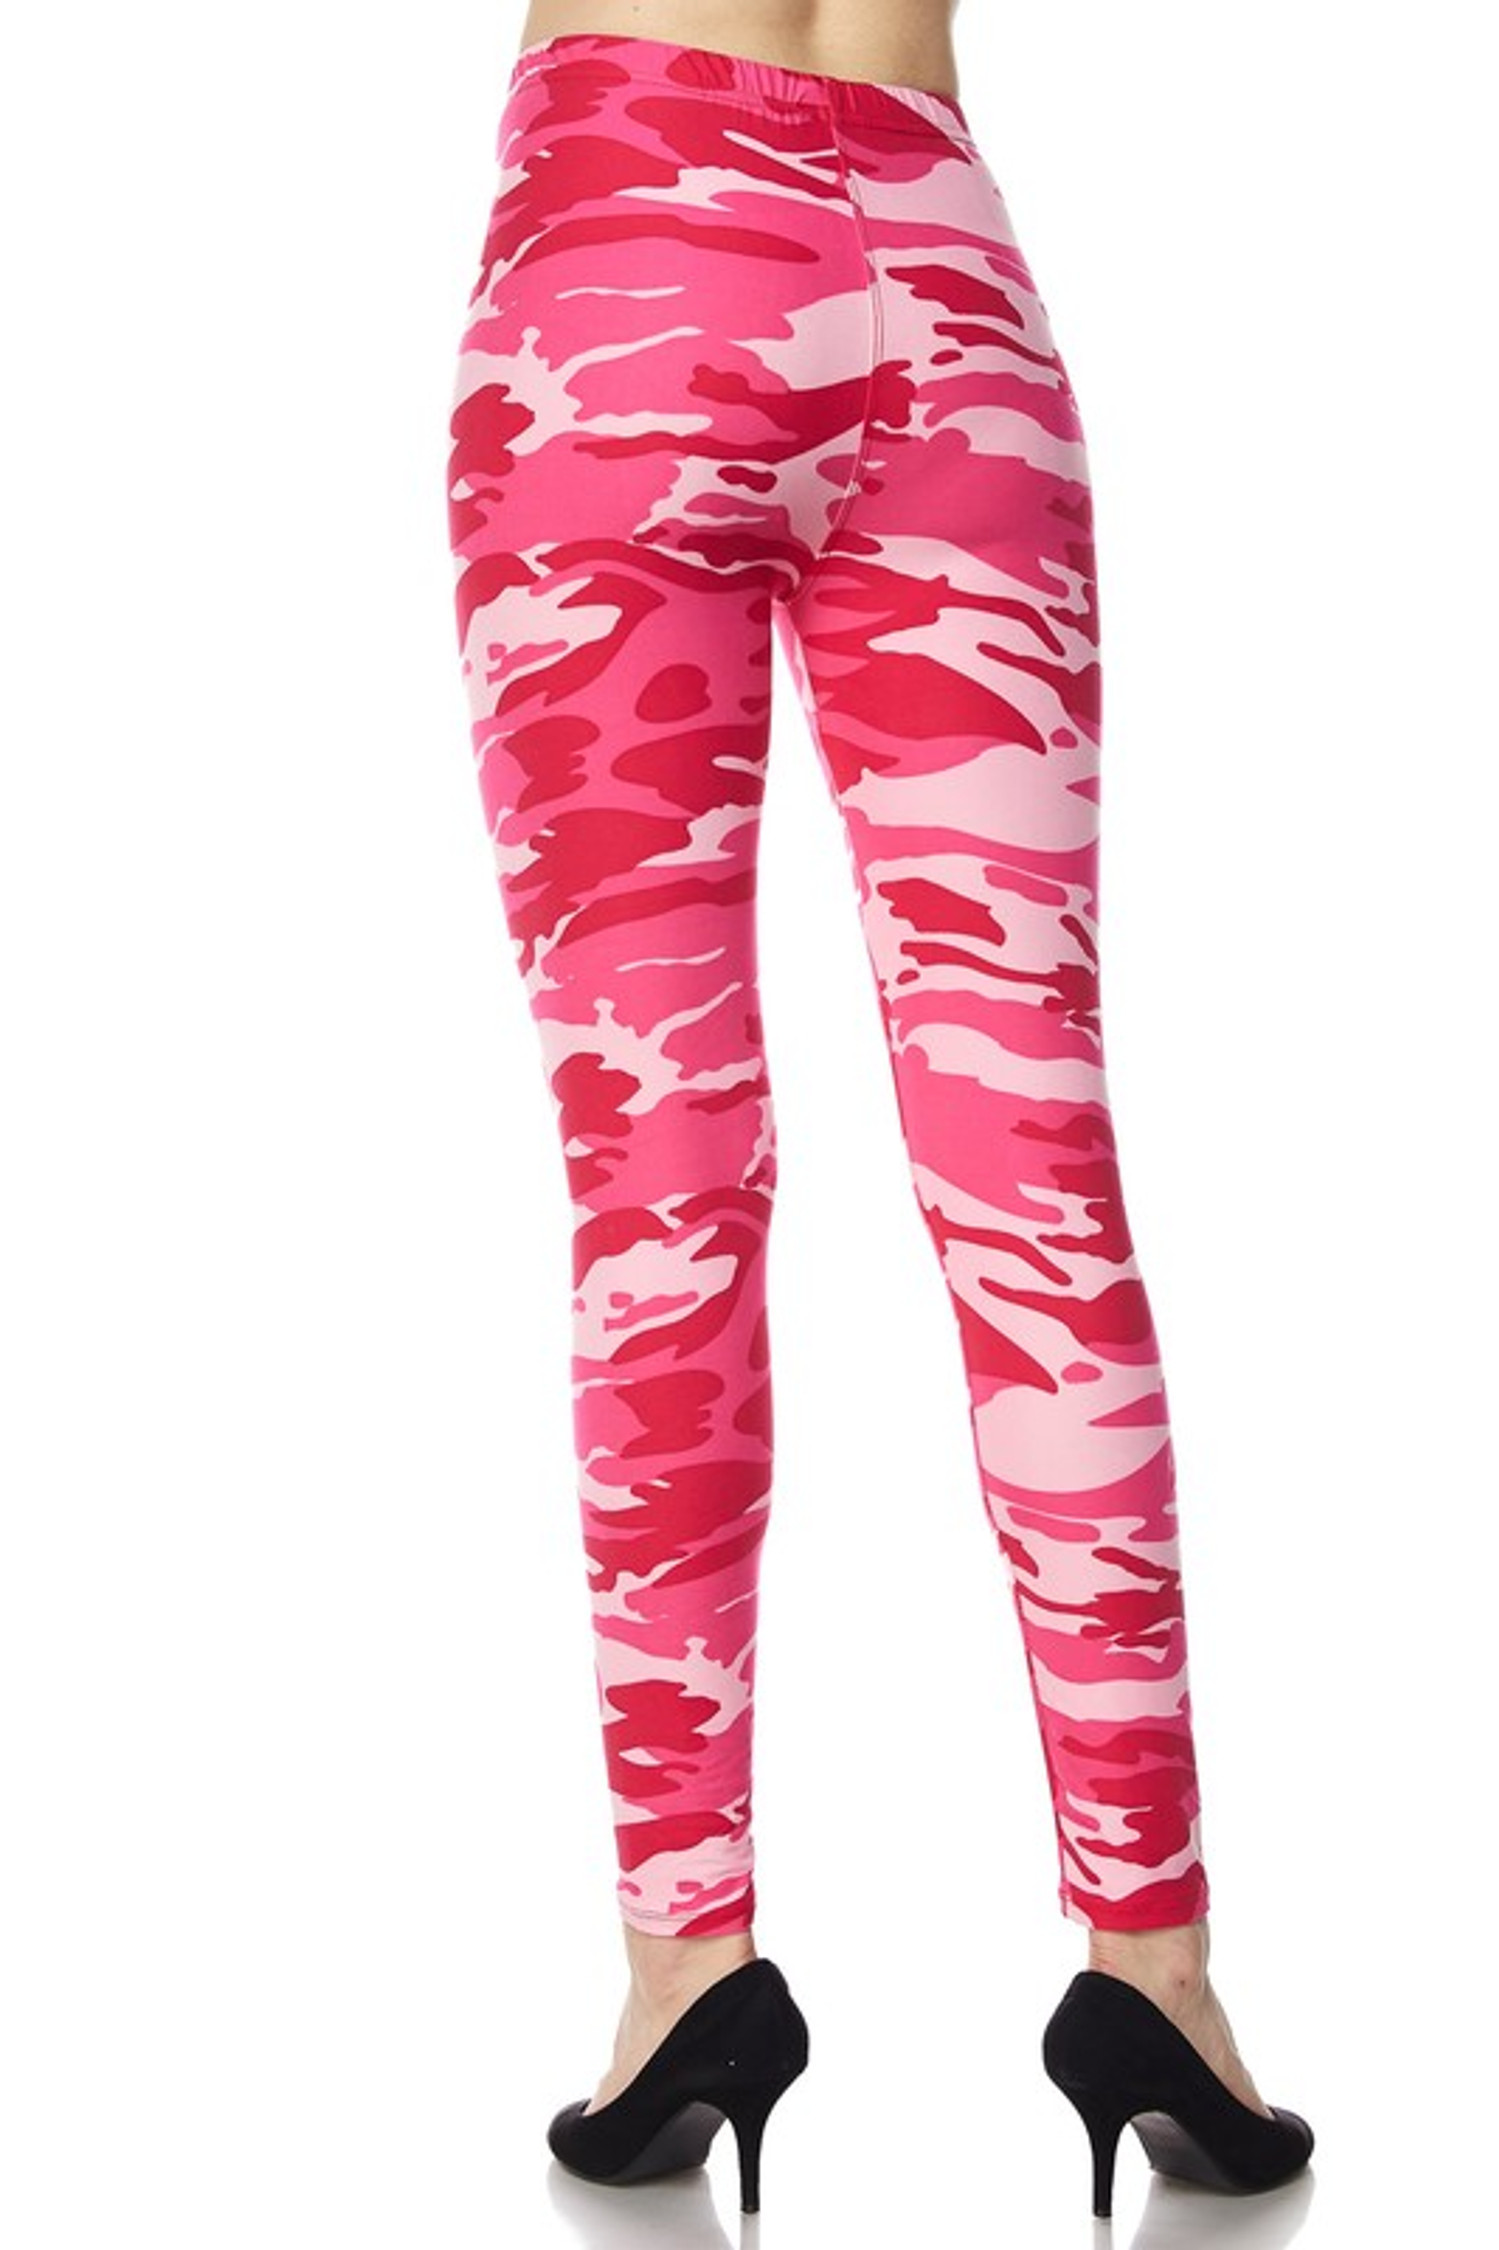 women's plus size pink camouflage clothing